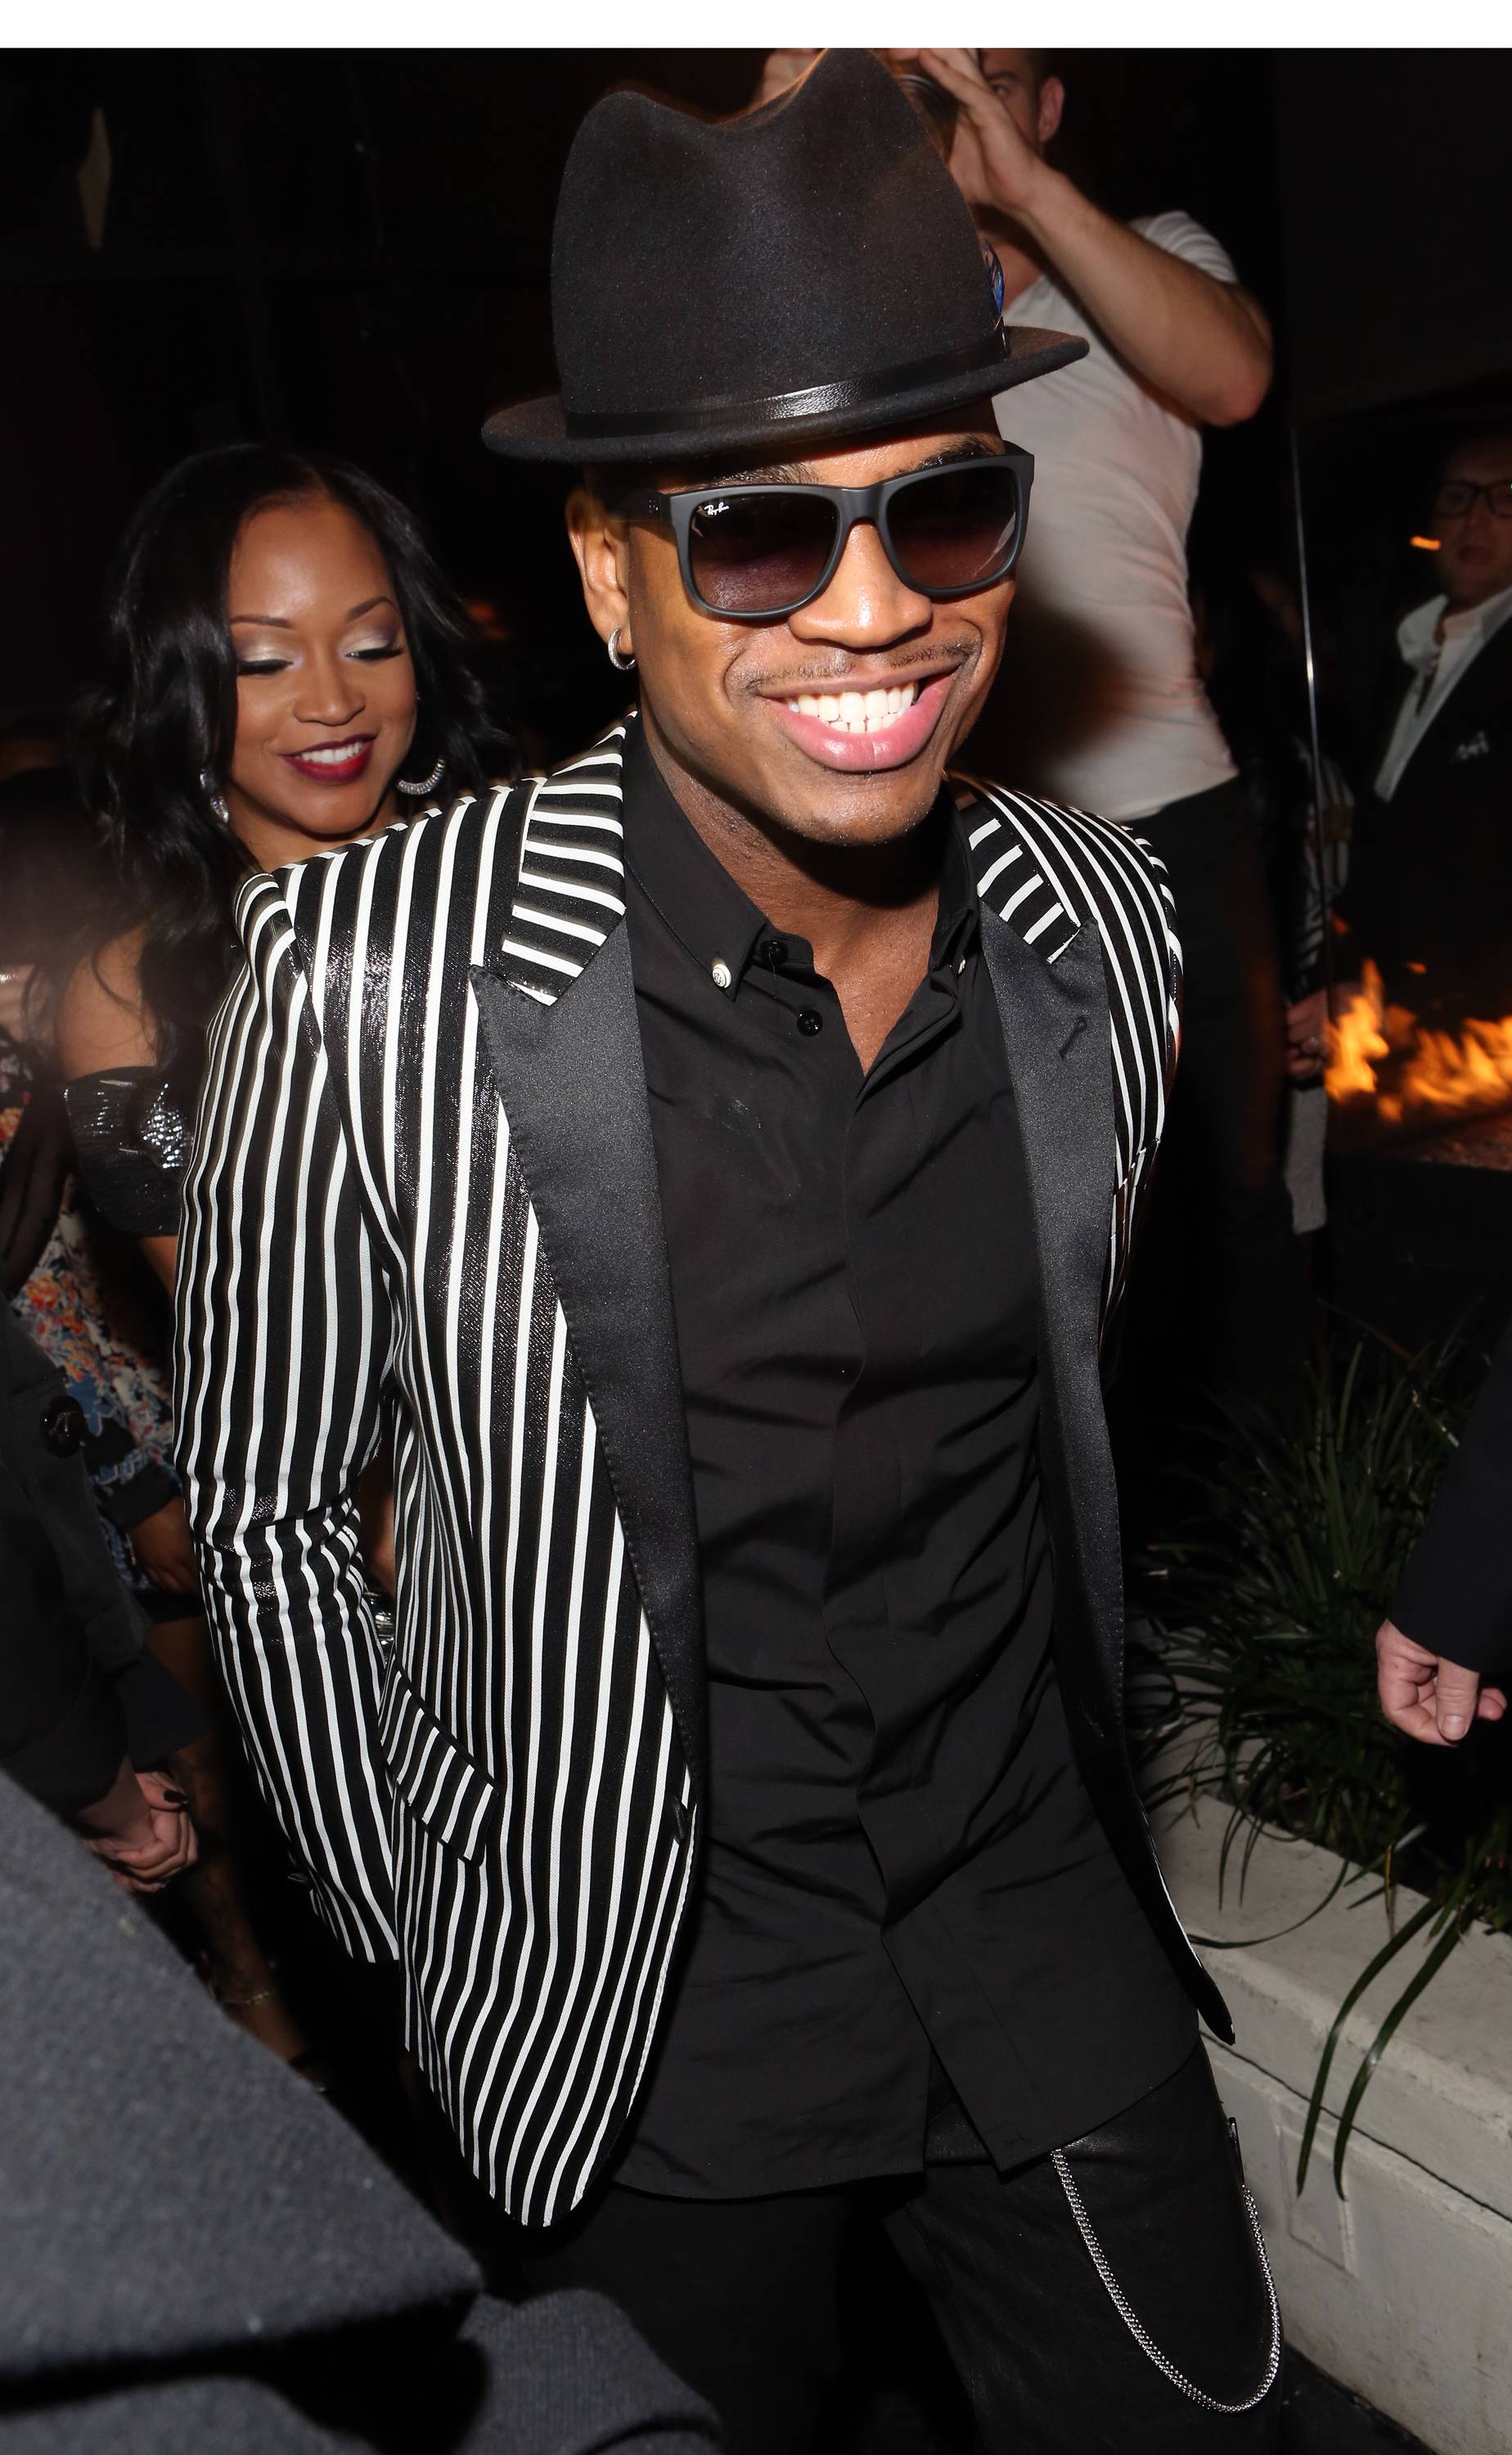 Ne-Yo arrives at his Fifth Annual Malibu Red Midnight Brunch, Saturday, Feb. 9, 2013 in Los Angeles, Calif. (Photo by Rene Macura/Invision for Malibu Red/AP Images)